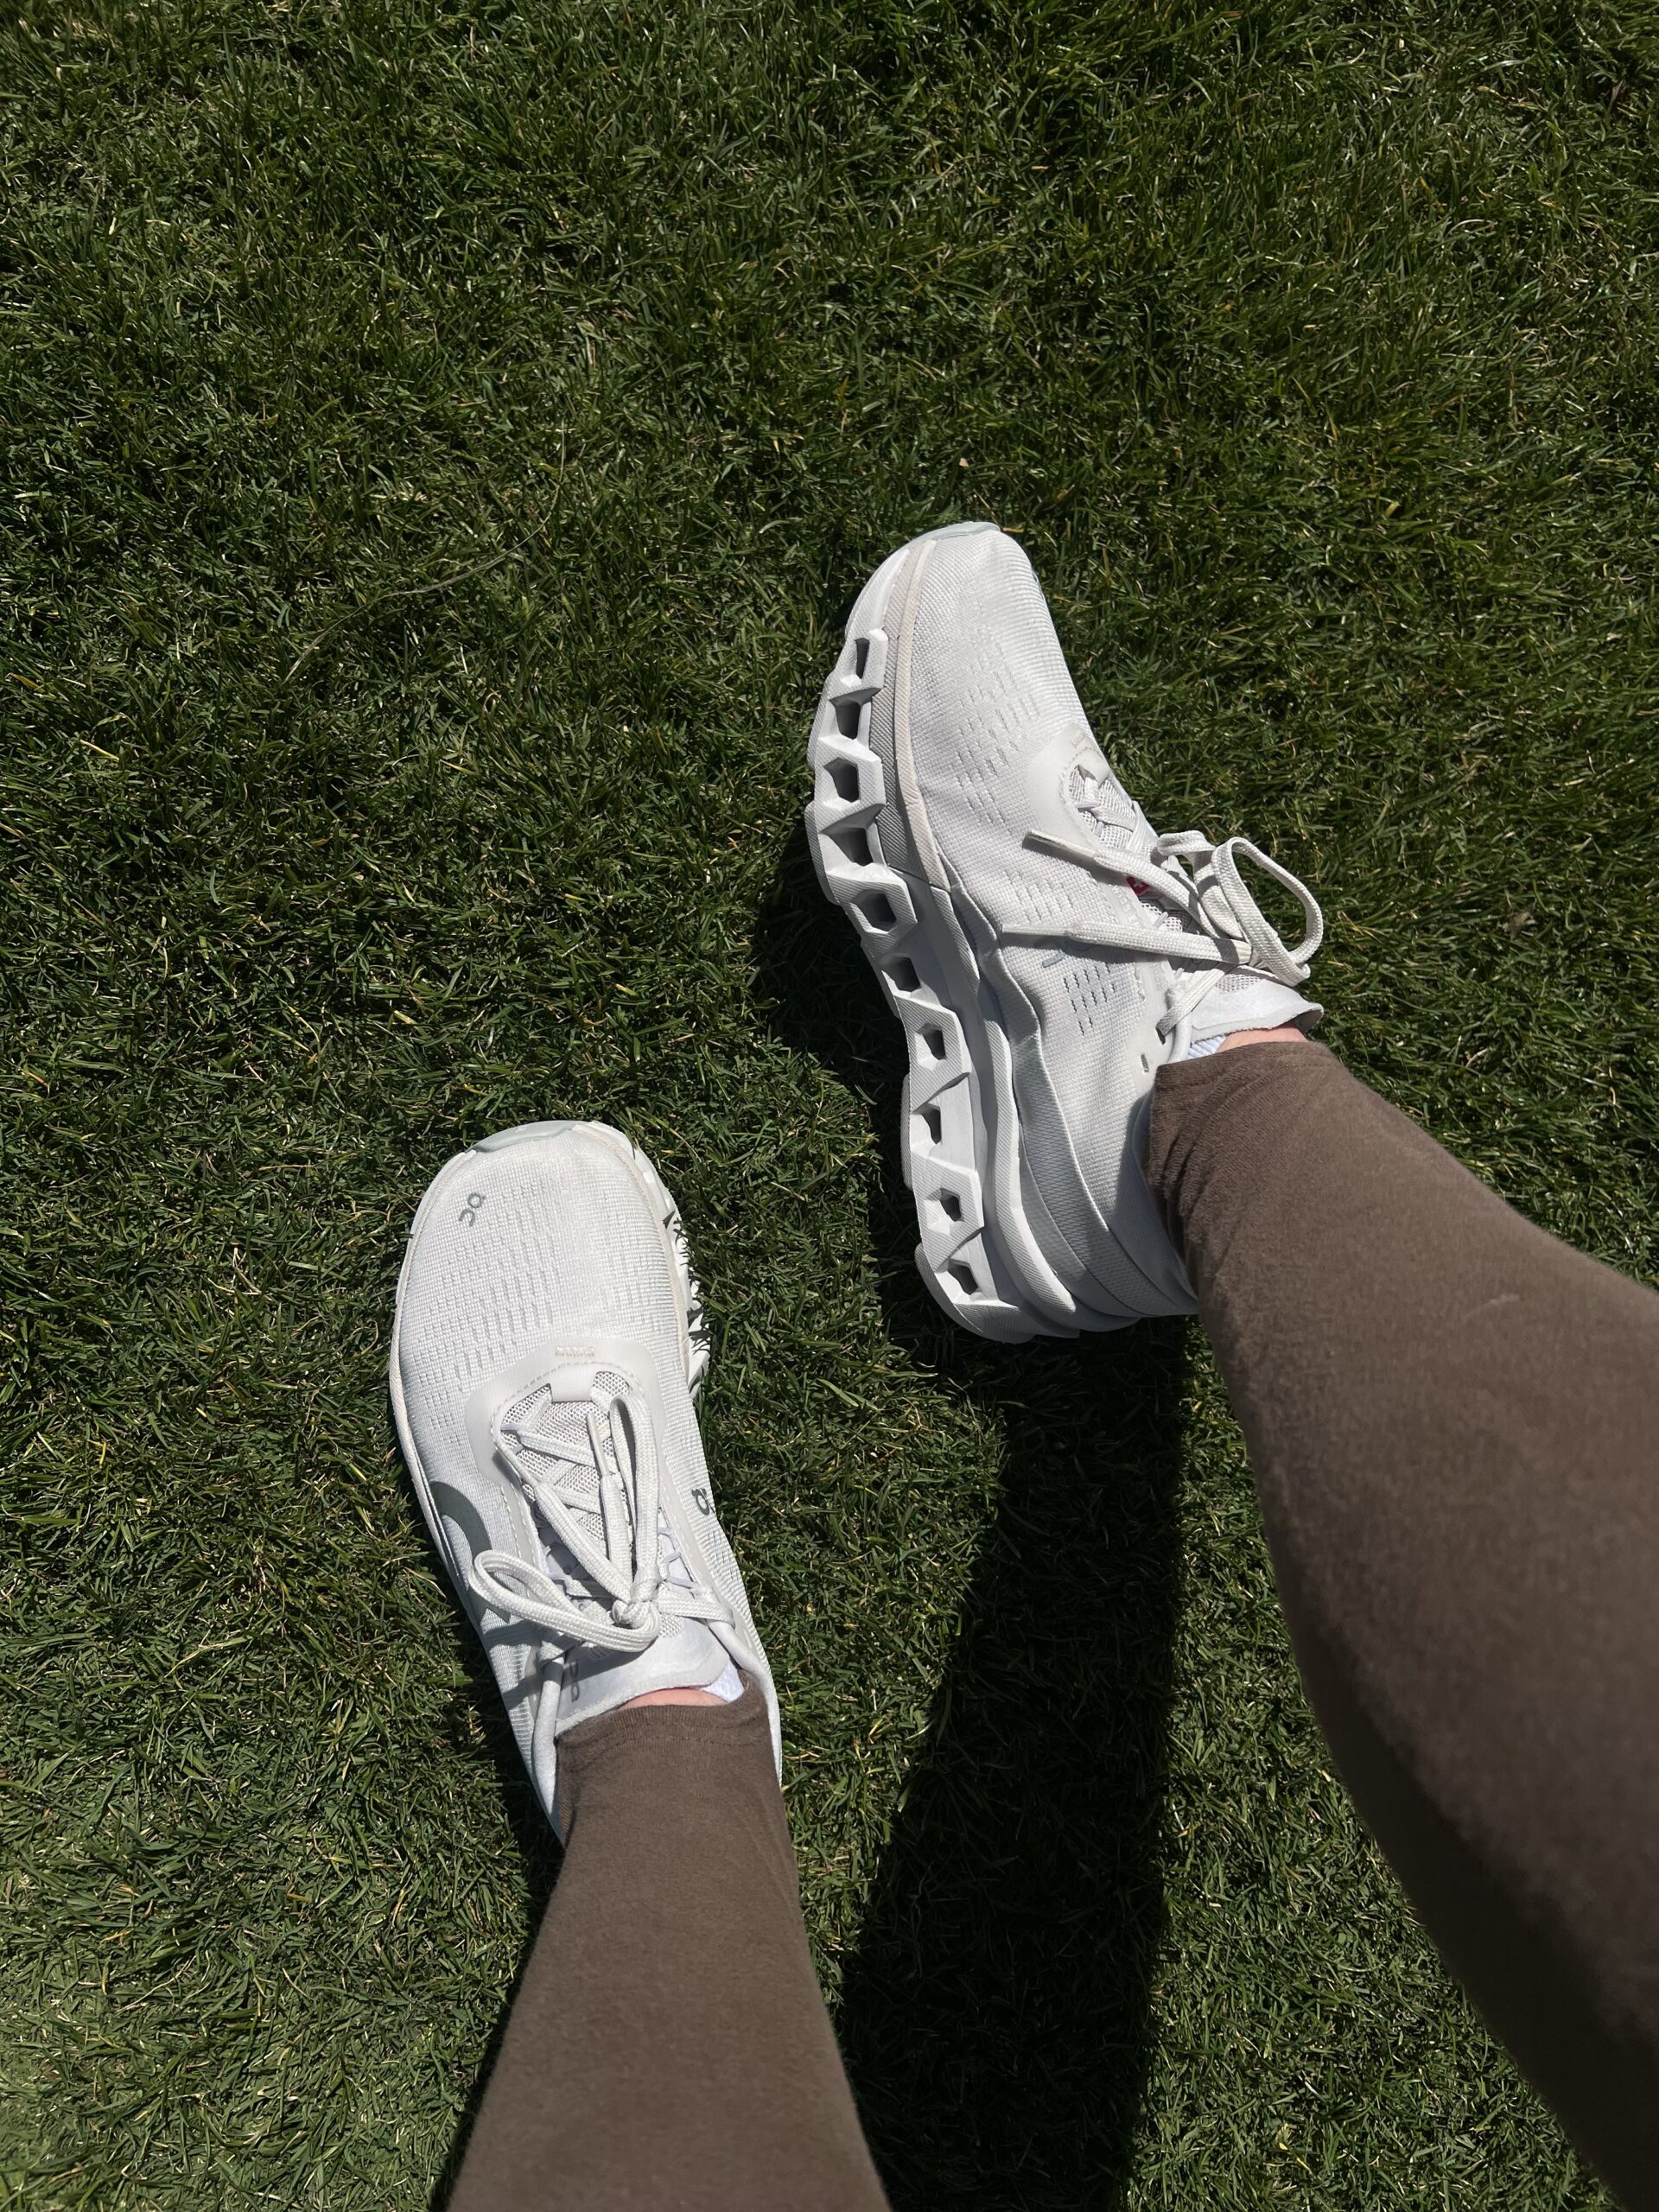 A person wearing white sneakers and brown leggings, standing on lush green grass.